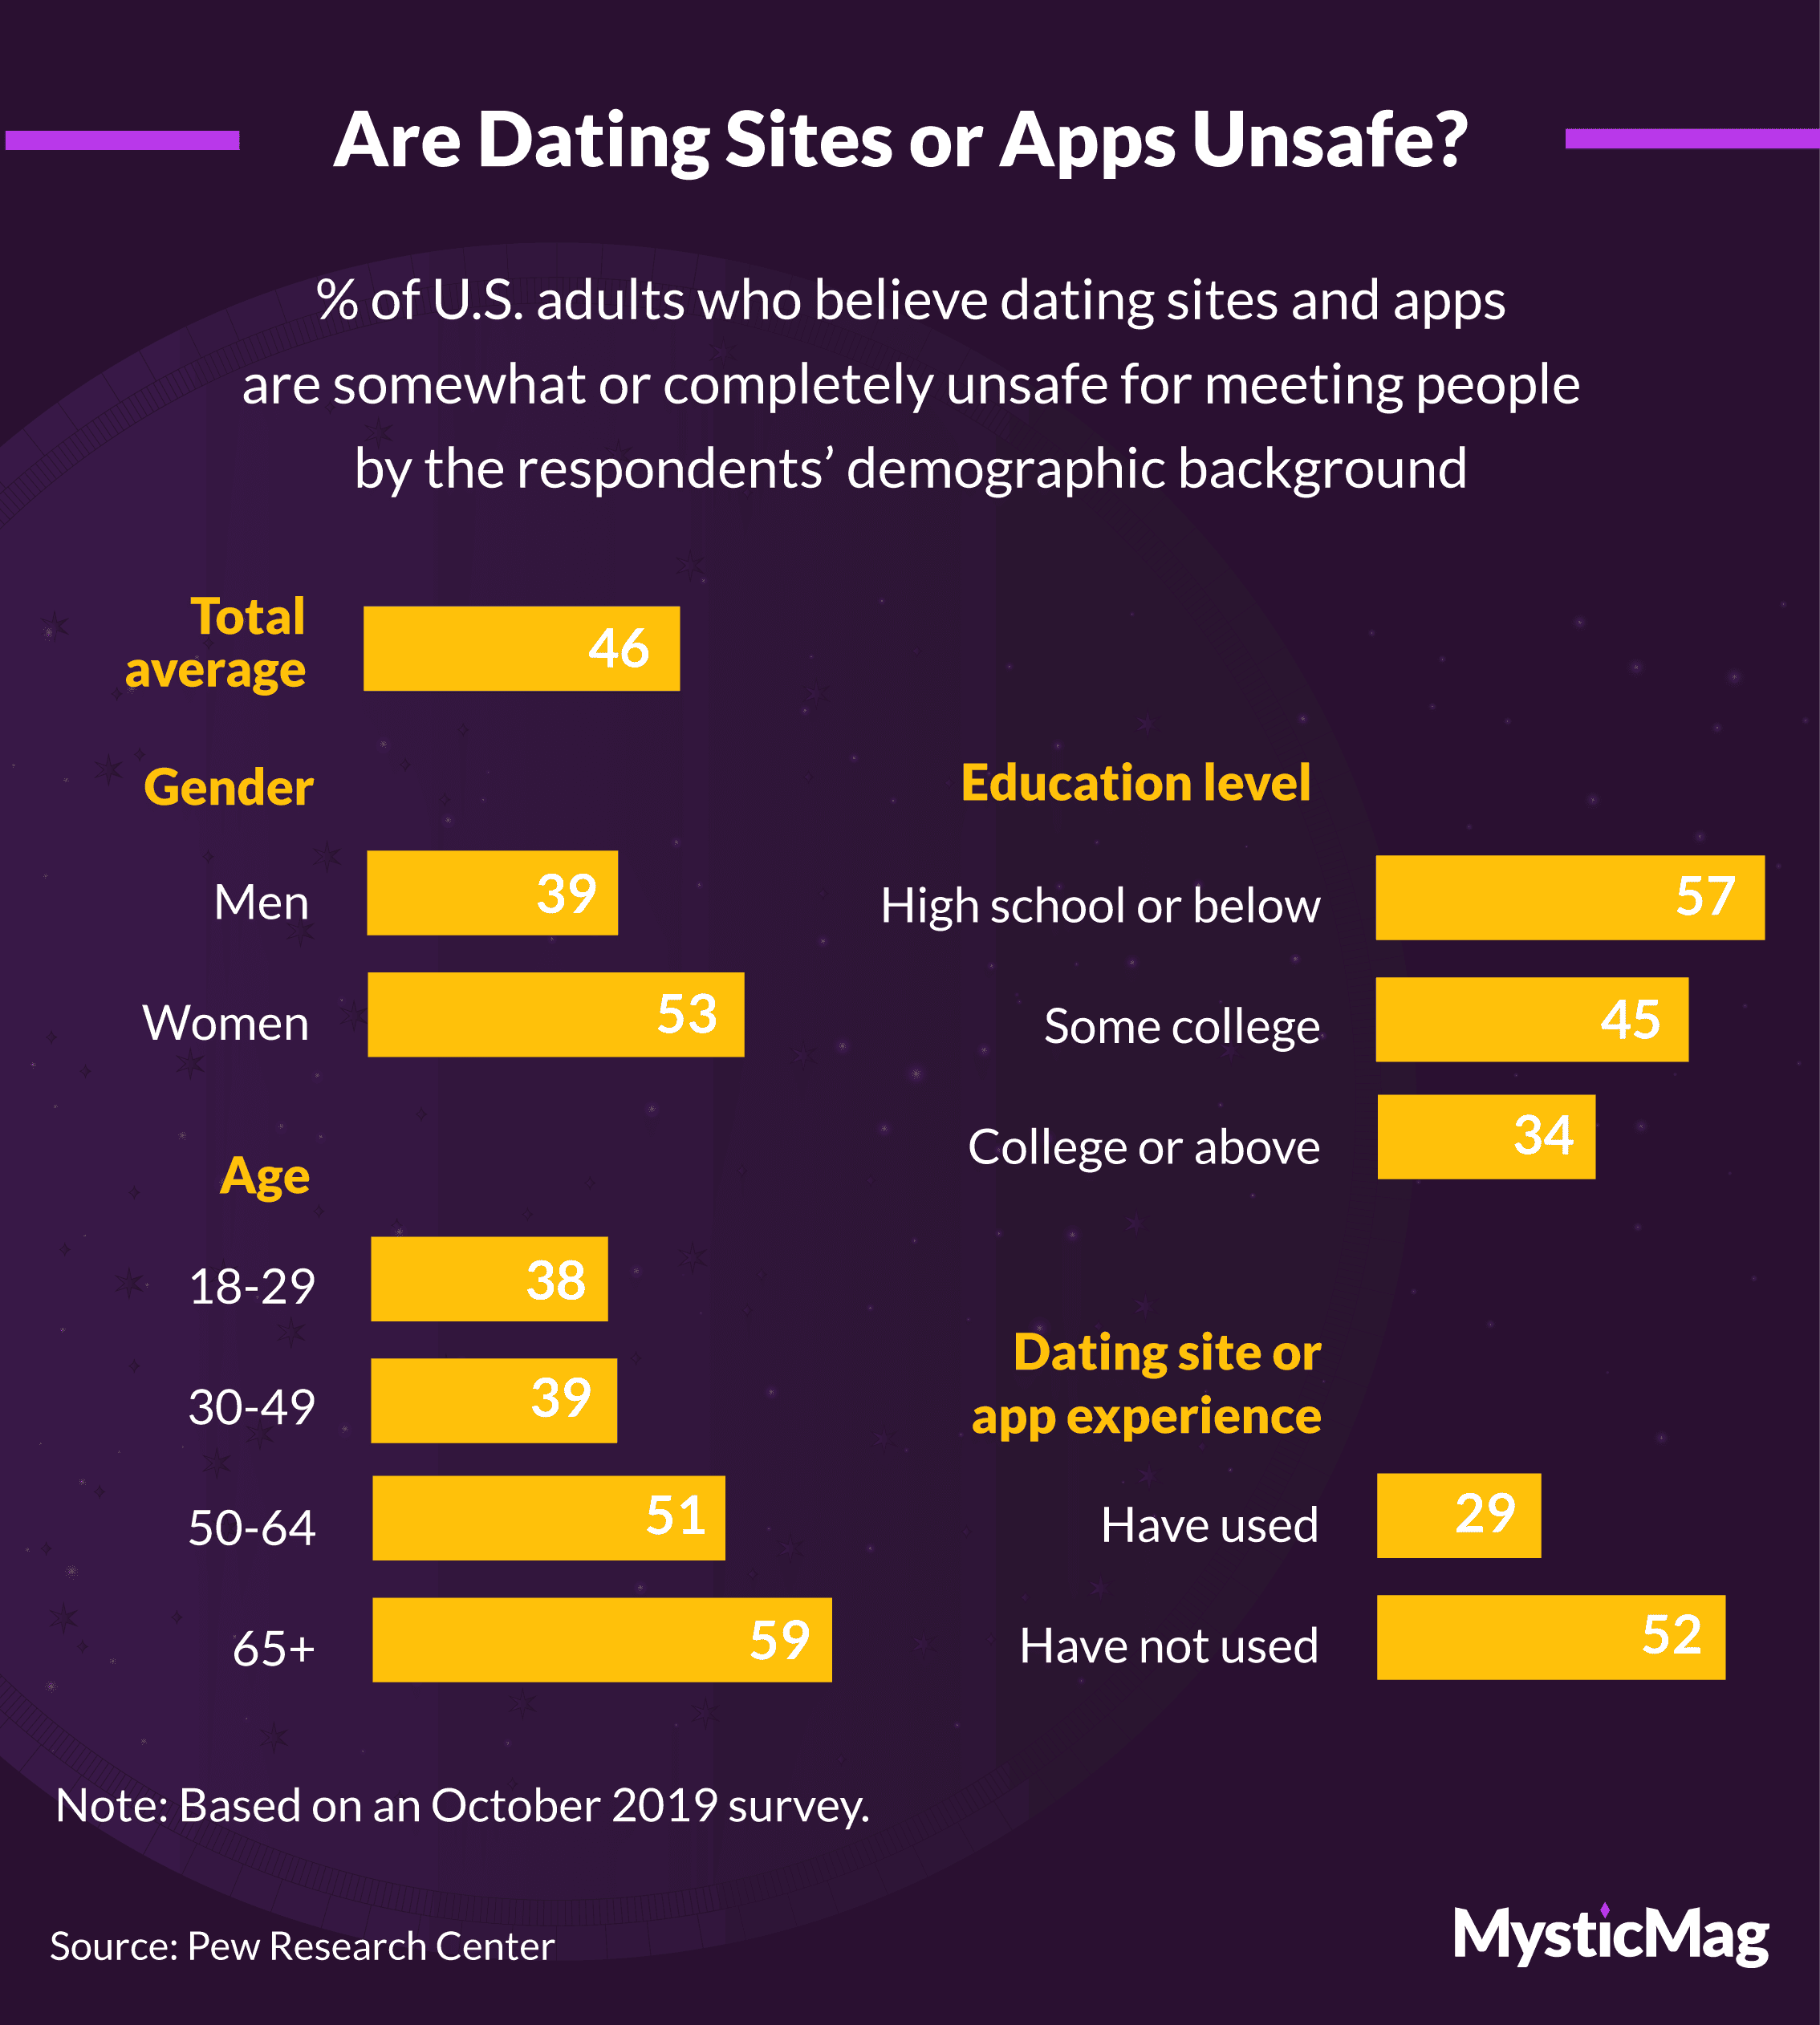 Percentage of people who think dating apps are unsafe by demographic background